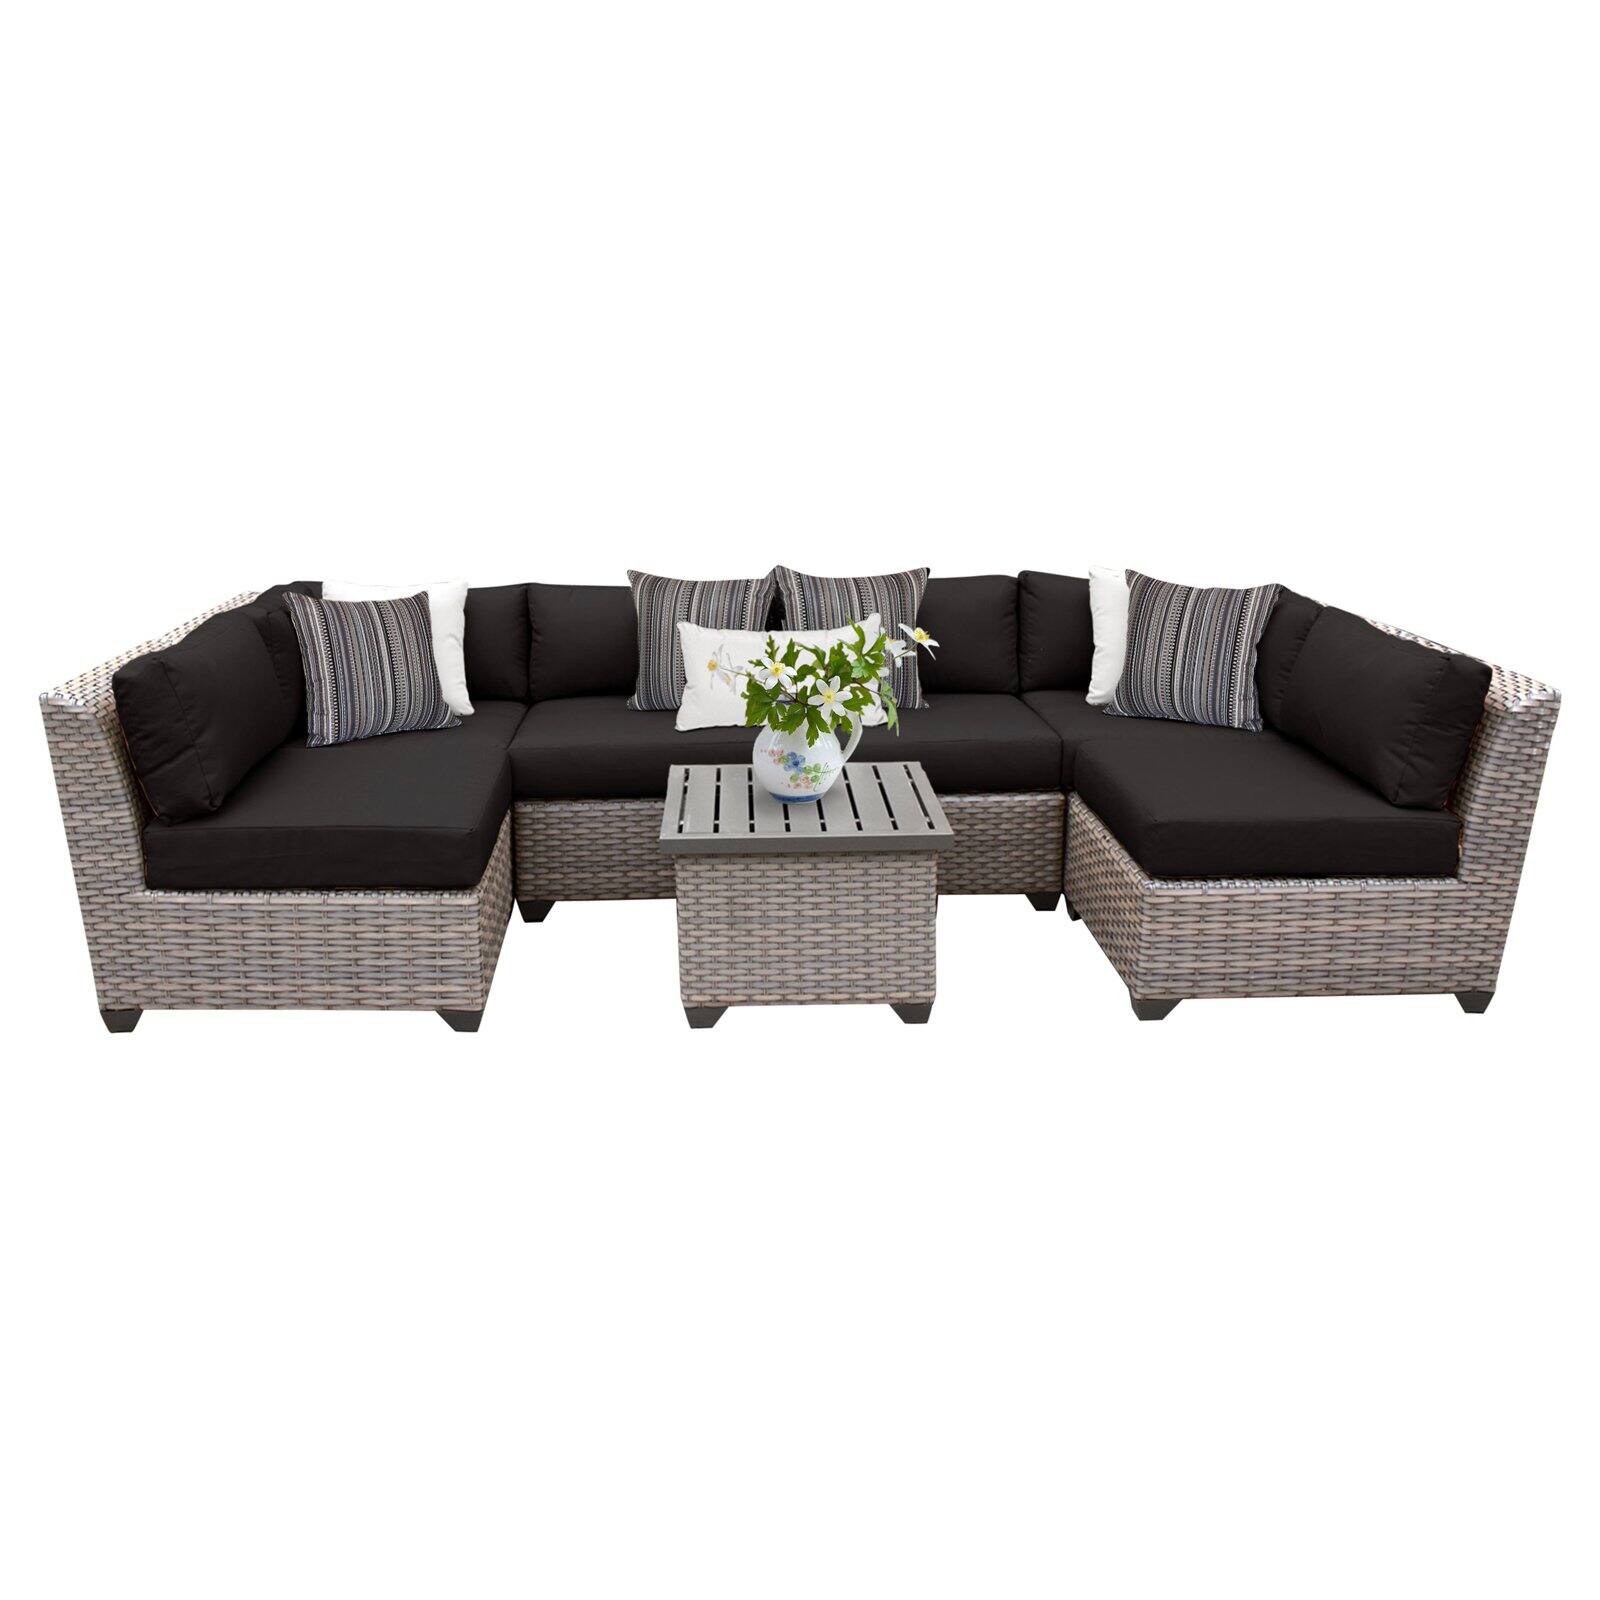 Florence 7 Piece Outdoor Wicker Patio Furniture Set 07c in Black - image 1 of 2